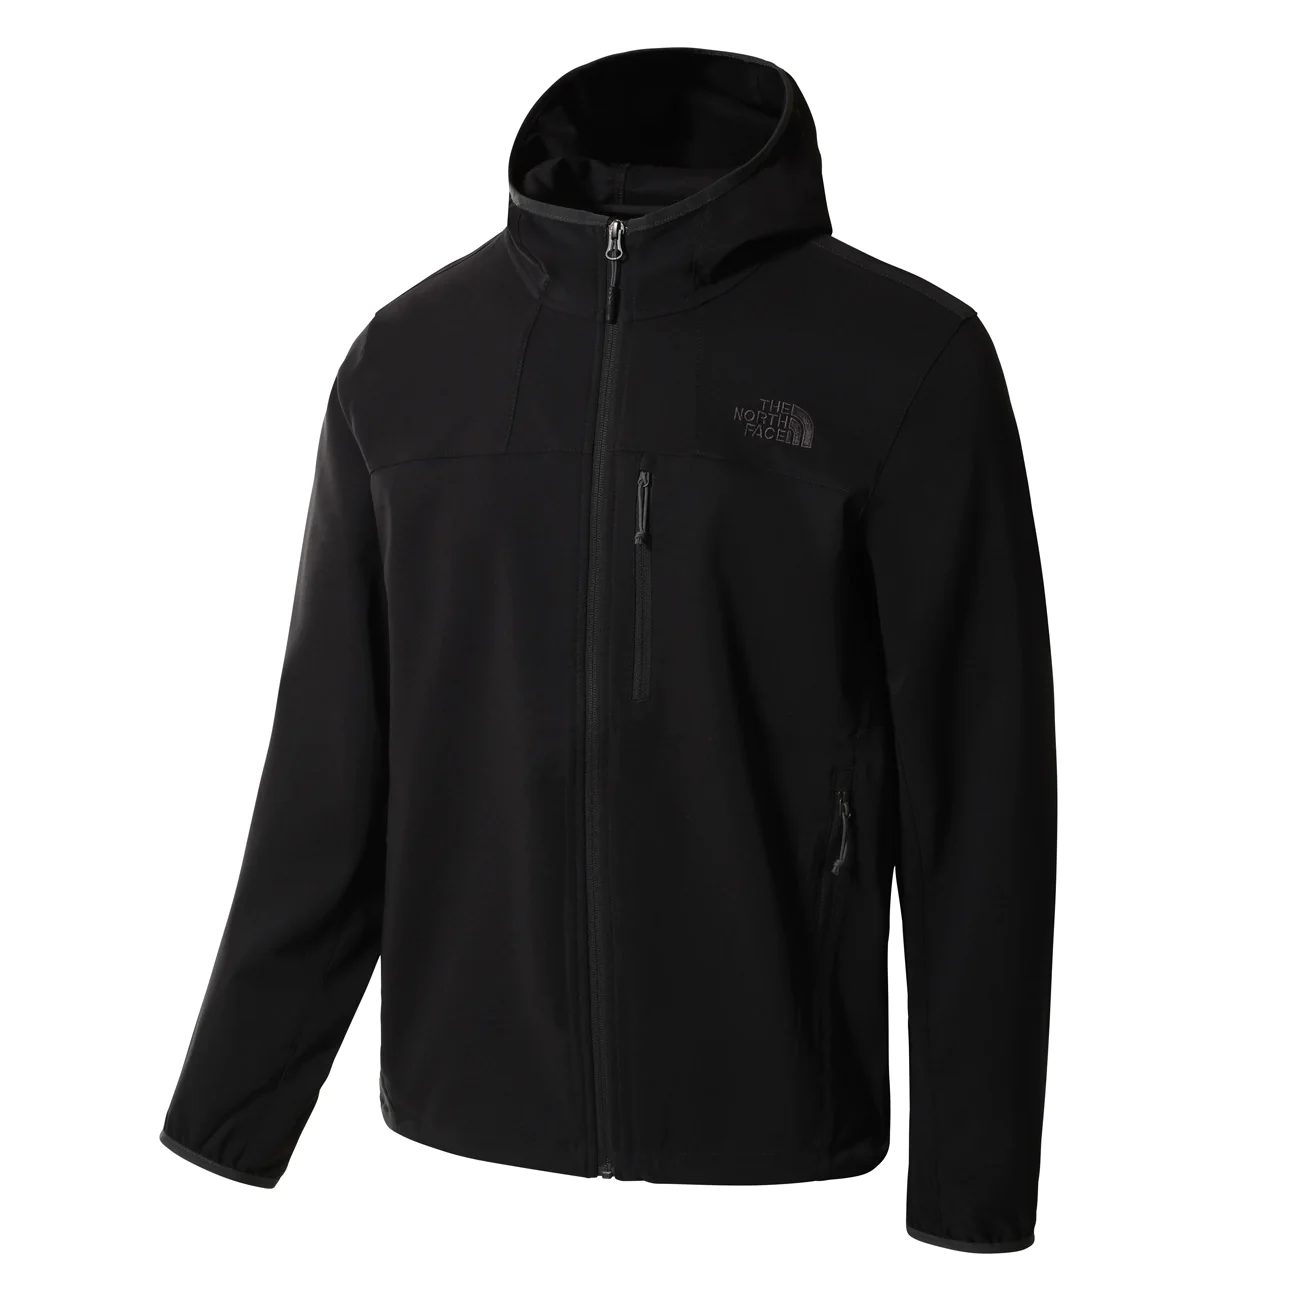 The North Face Jas Nimble Hoodie